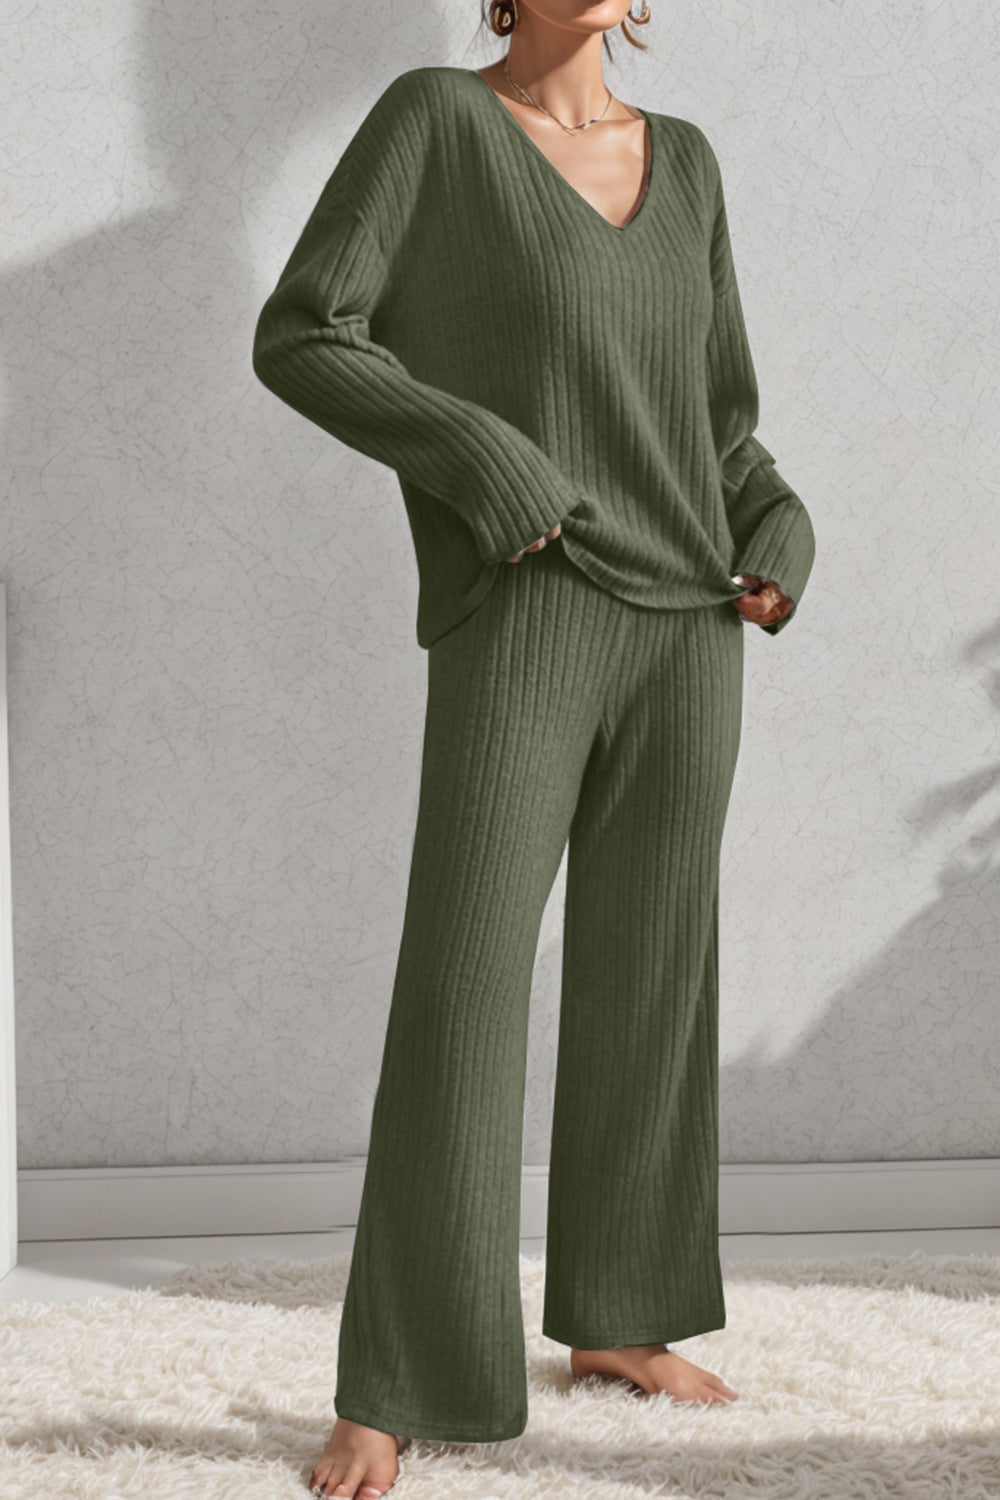 Ribbed V-Neck  Cotton Casual Top and Pants Set